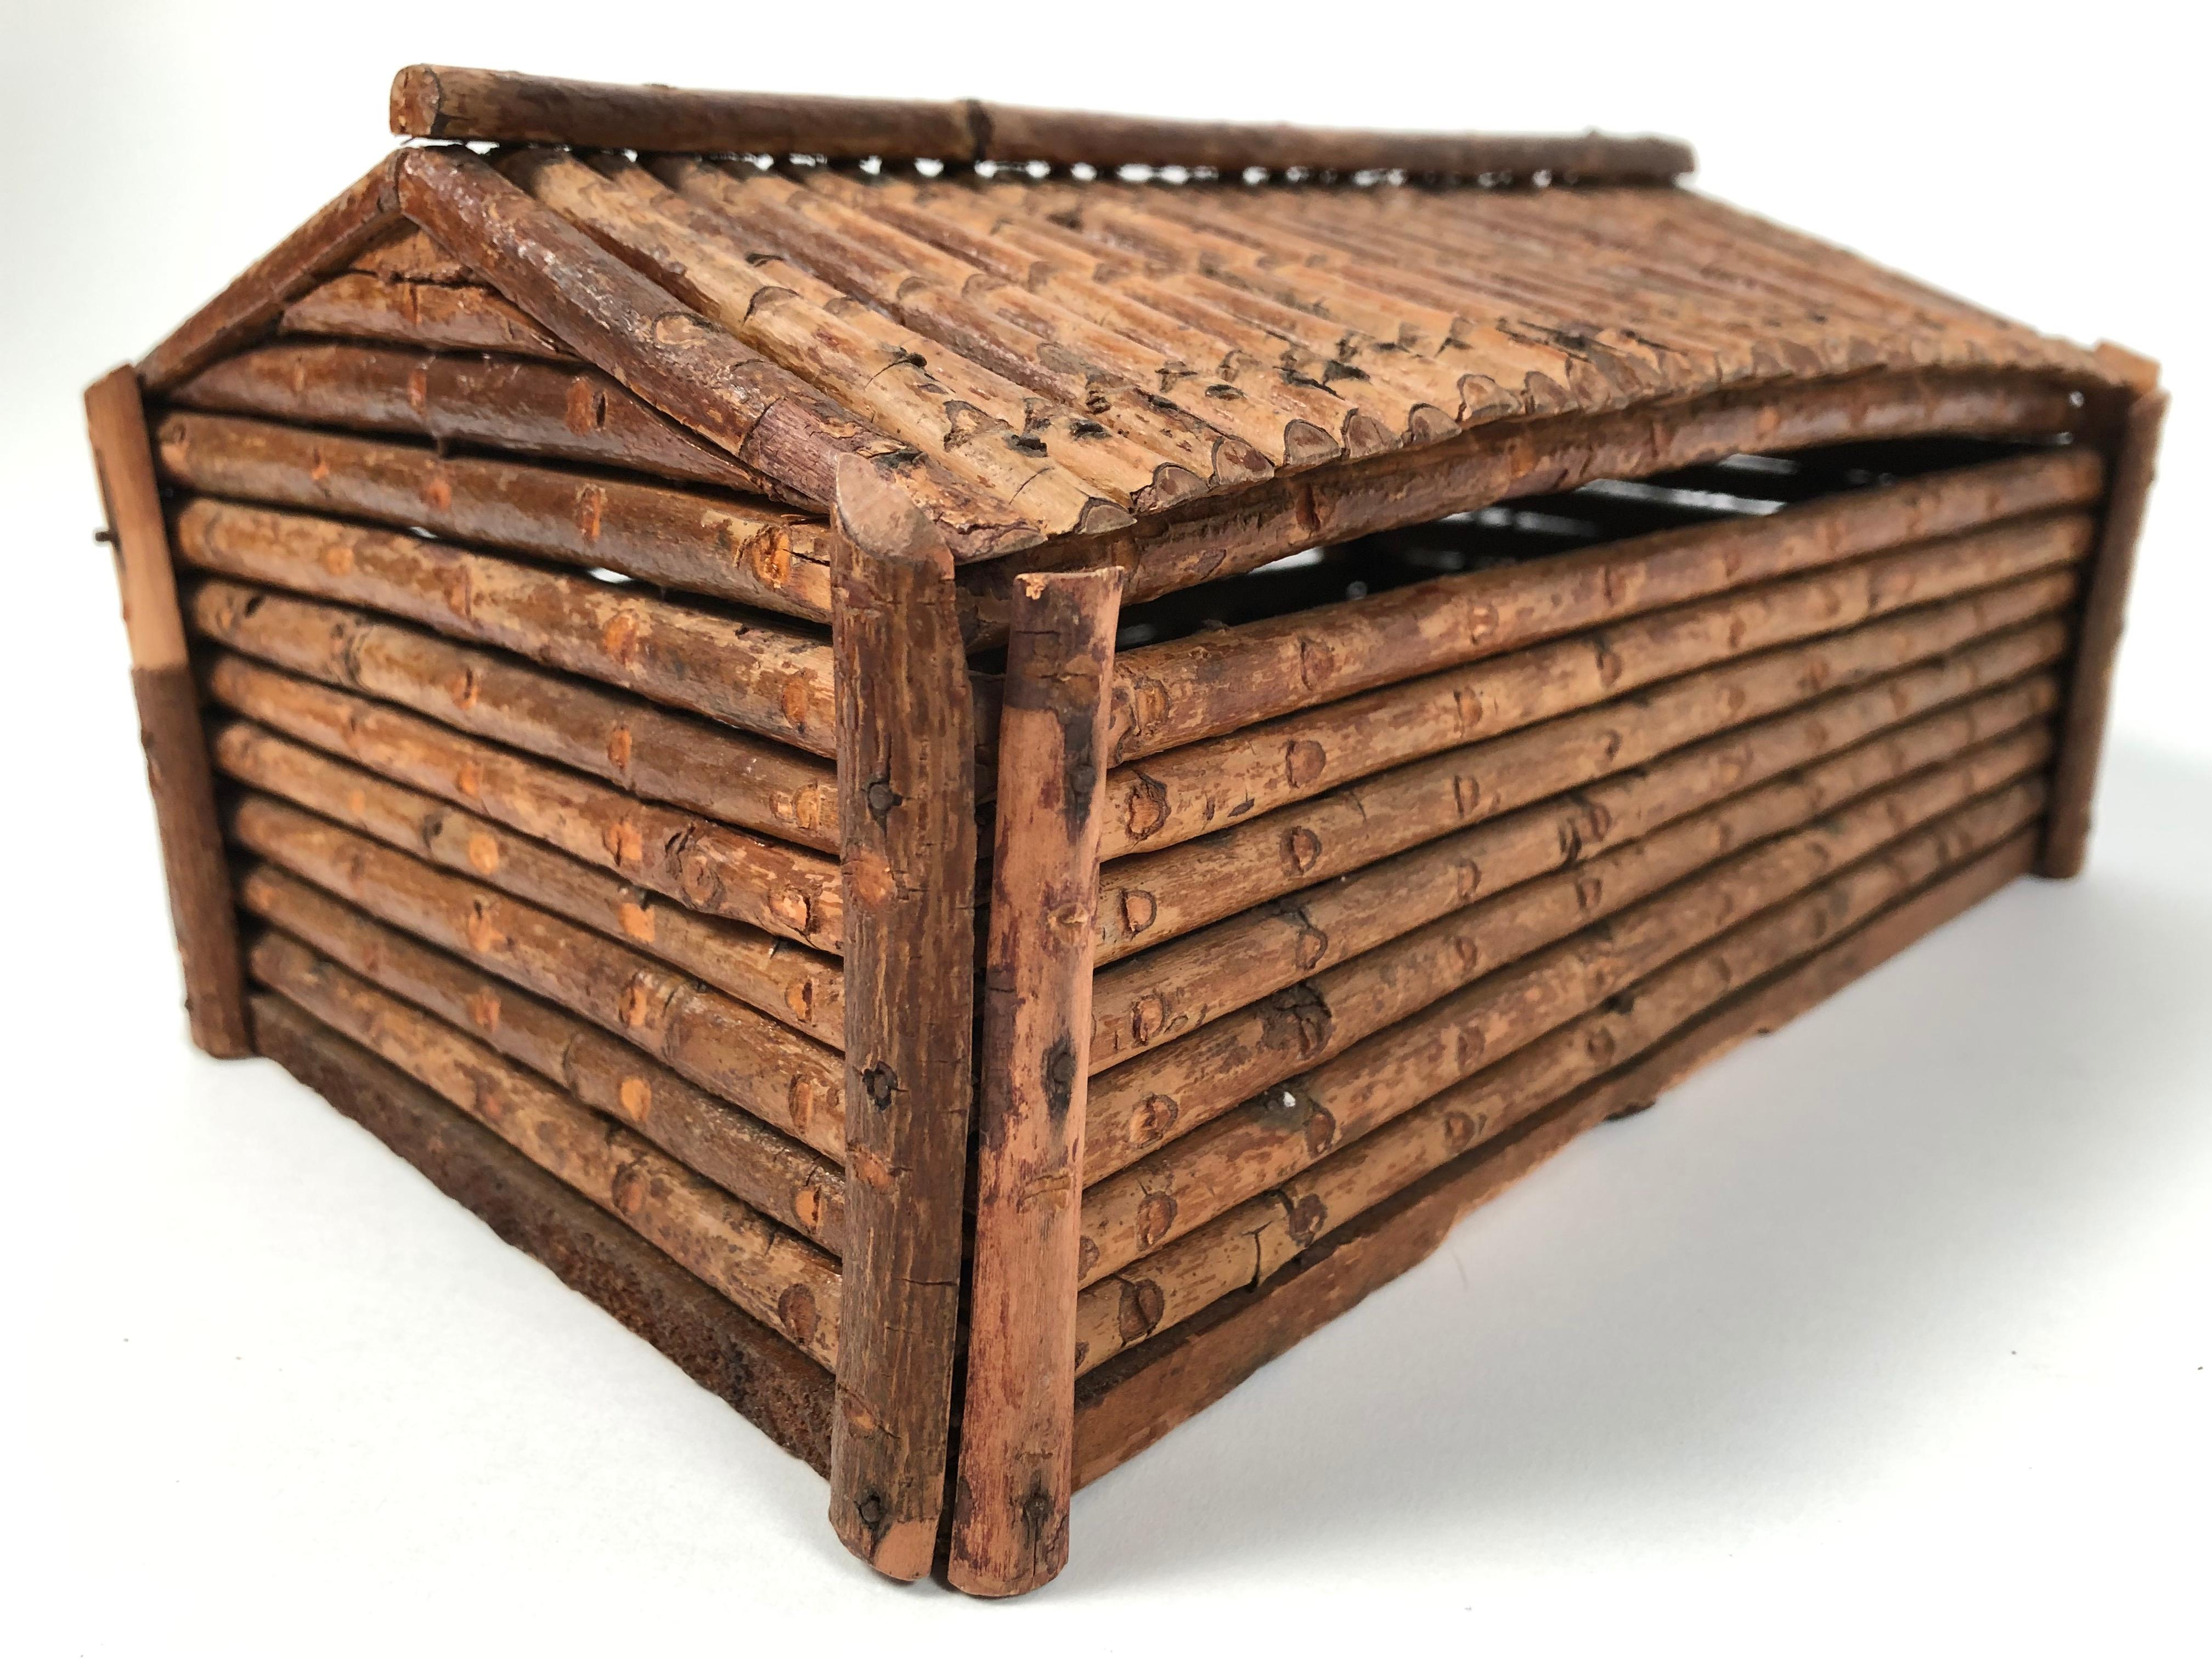 A vintage, handmade Folk Art twig log cabin covered box, the removable triangular roof over a rectangular base. Wonderfully elemental, this box reads as both country and modern with its simple, clean lines. We love it as a decorative object, but it